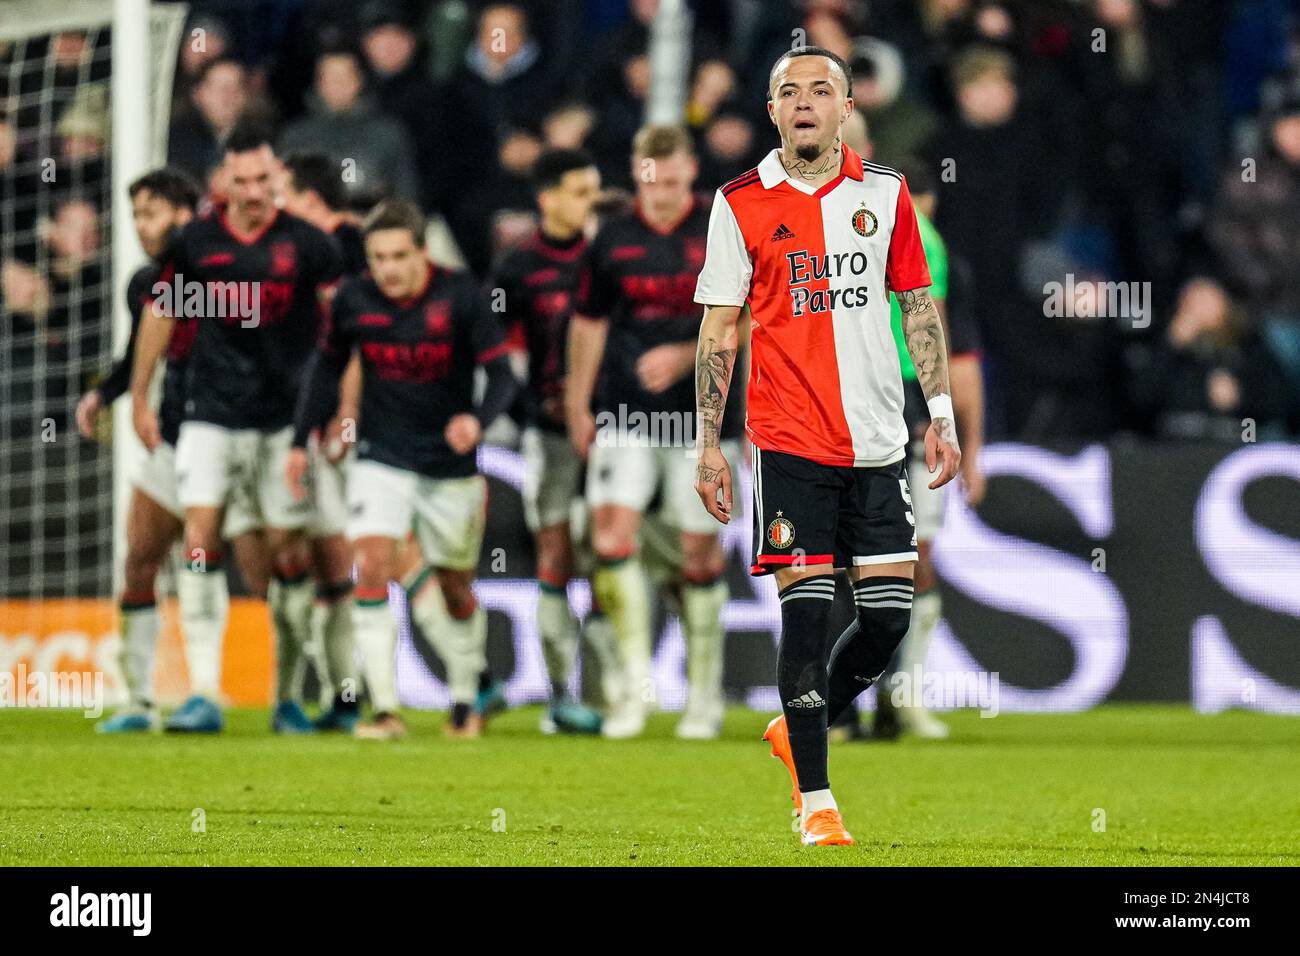 Rotterdam - Quilindschy Hartman of Feyenoord reacts to the 0-2 during the match between Feyenoord v NEC Nijmegen at Stadion Feijenoord De Kuip on 8 February 2023 in Rotterdam, Netherlands. (Box to Box Pictures/Yannick Verhoeven) Stock Photo